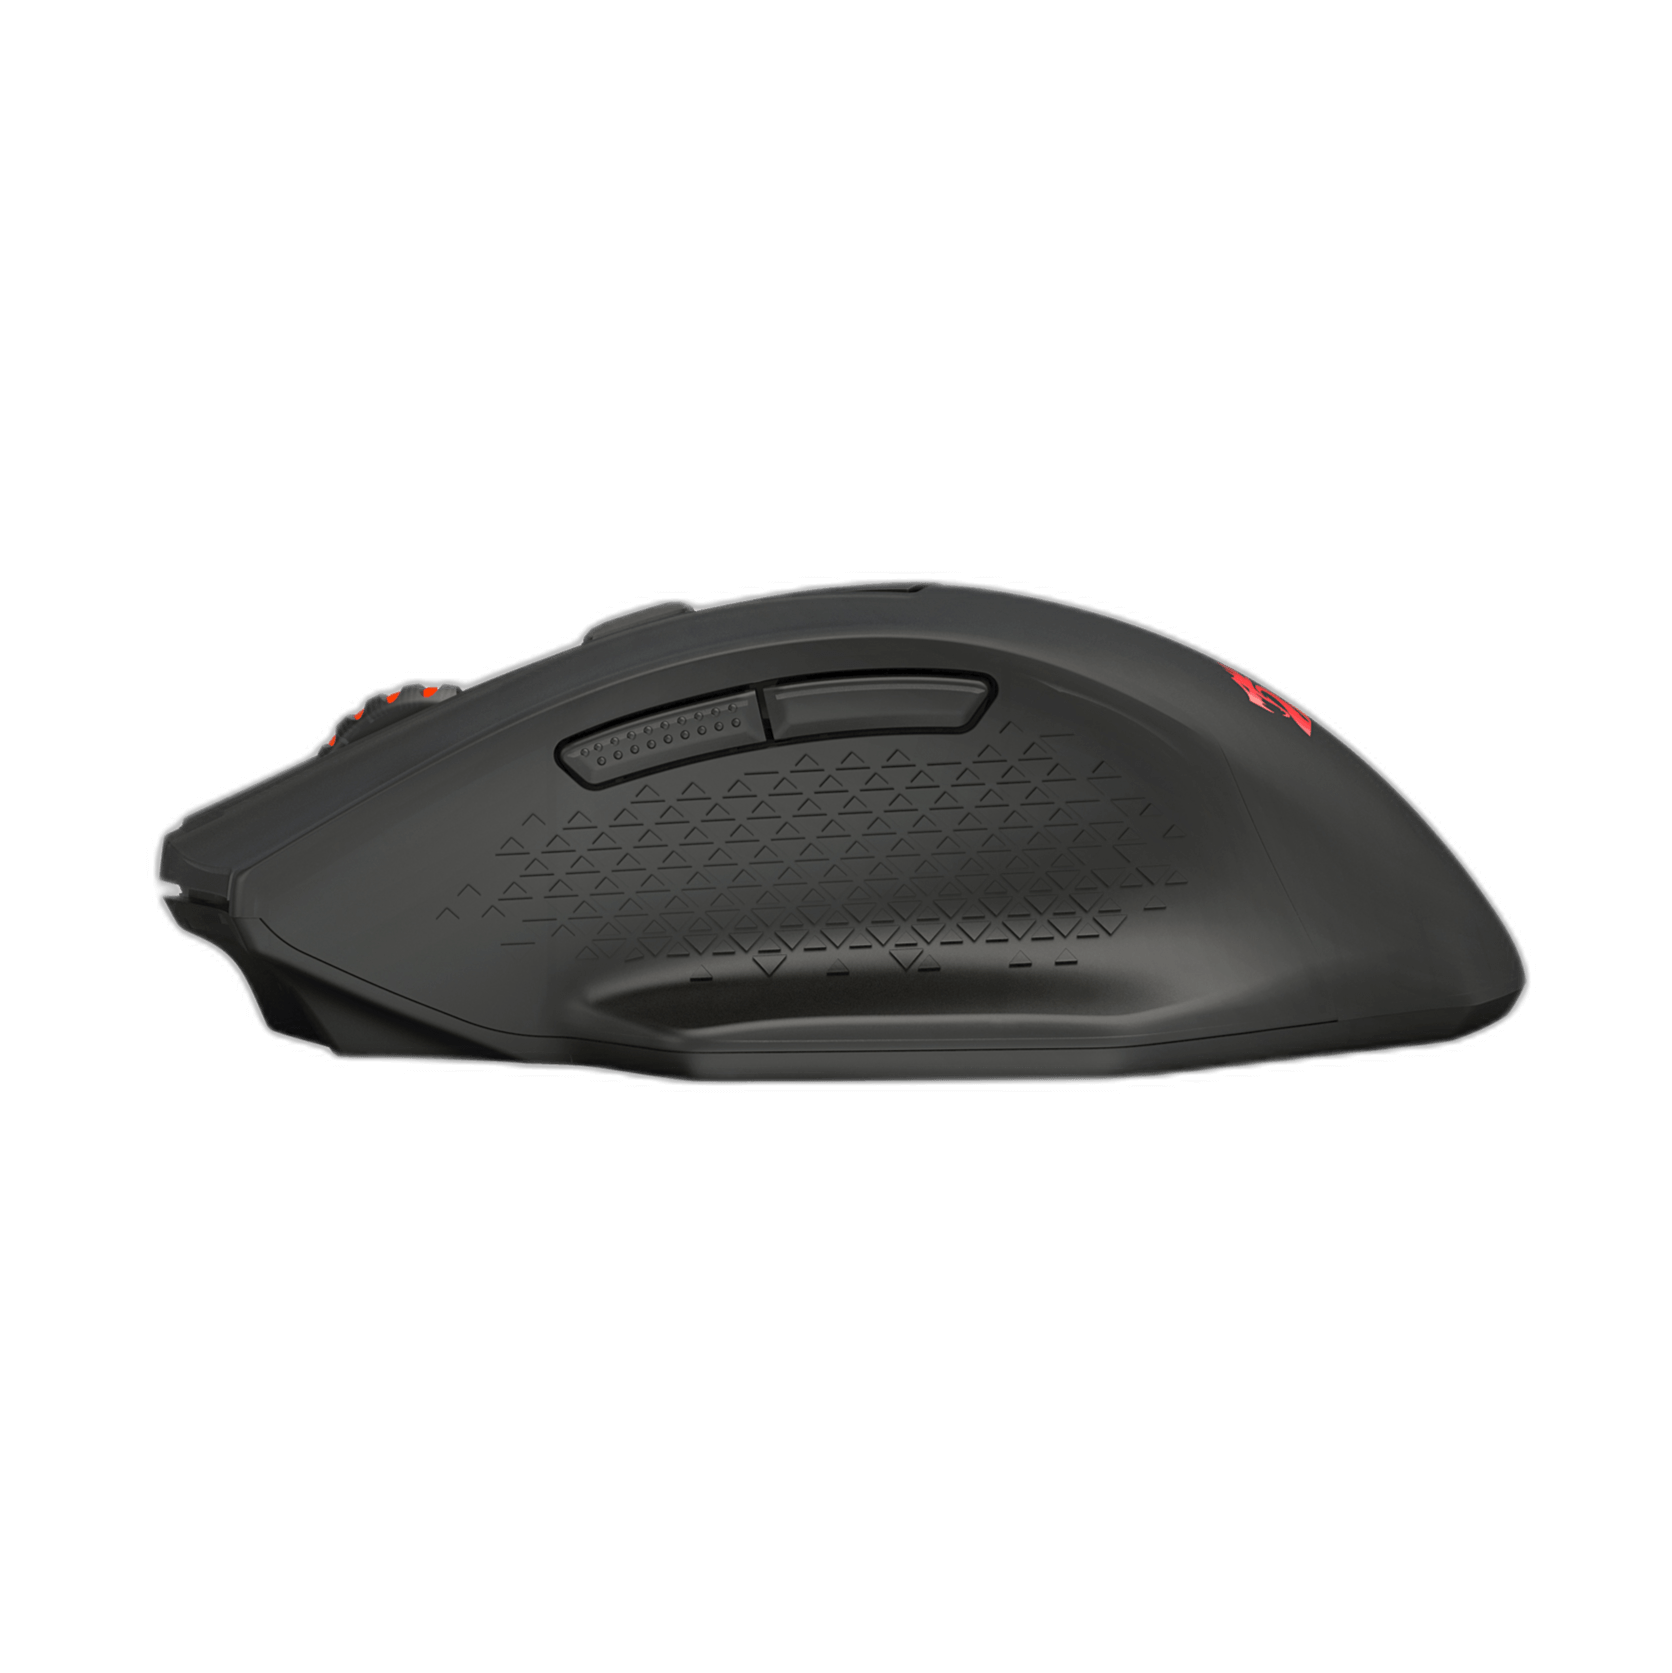 Redragon M994 Wireless Bluetooth Gaming Mouse